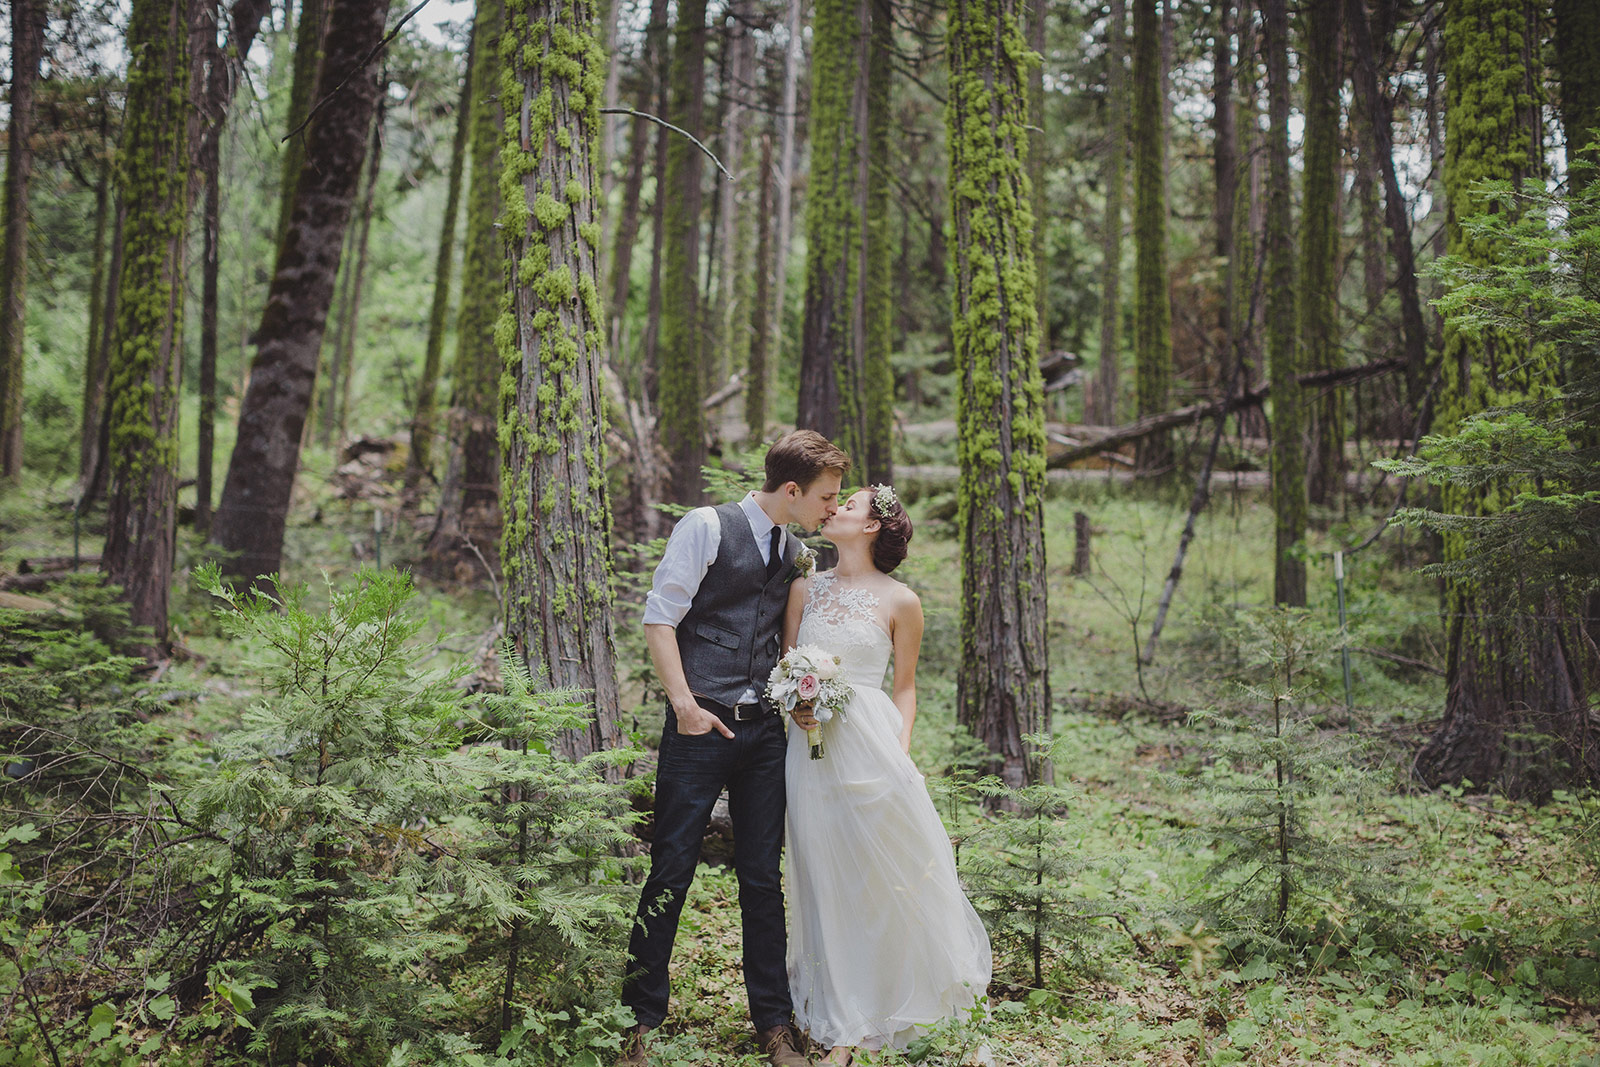 A man and woman kissing in the woods.